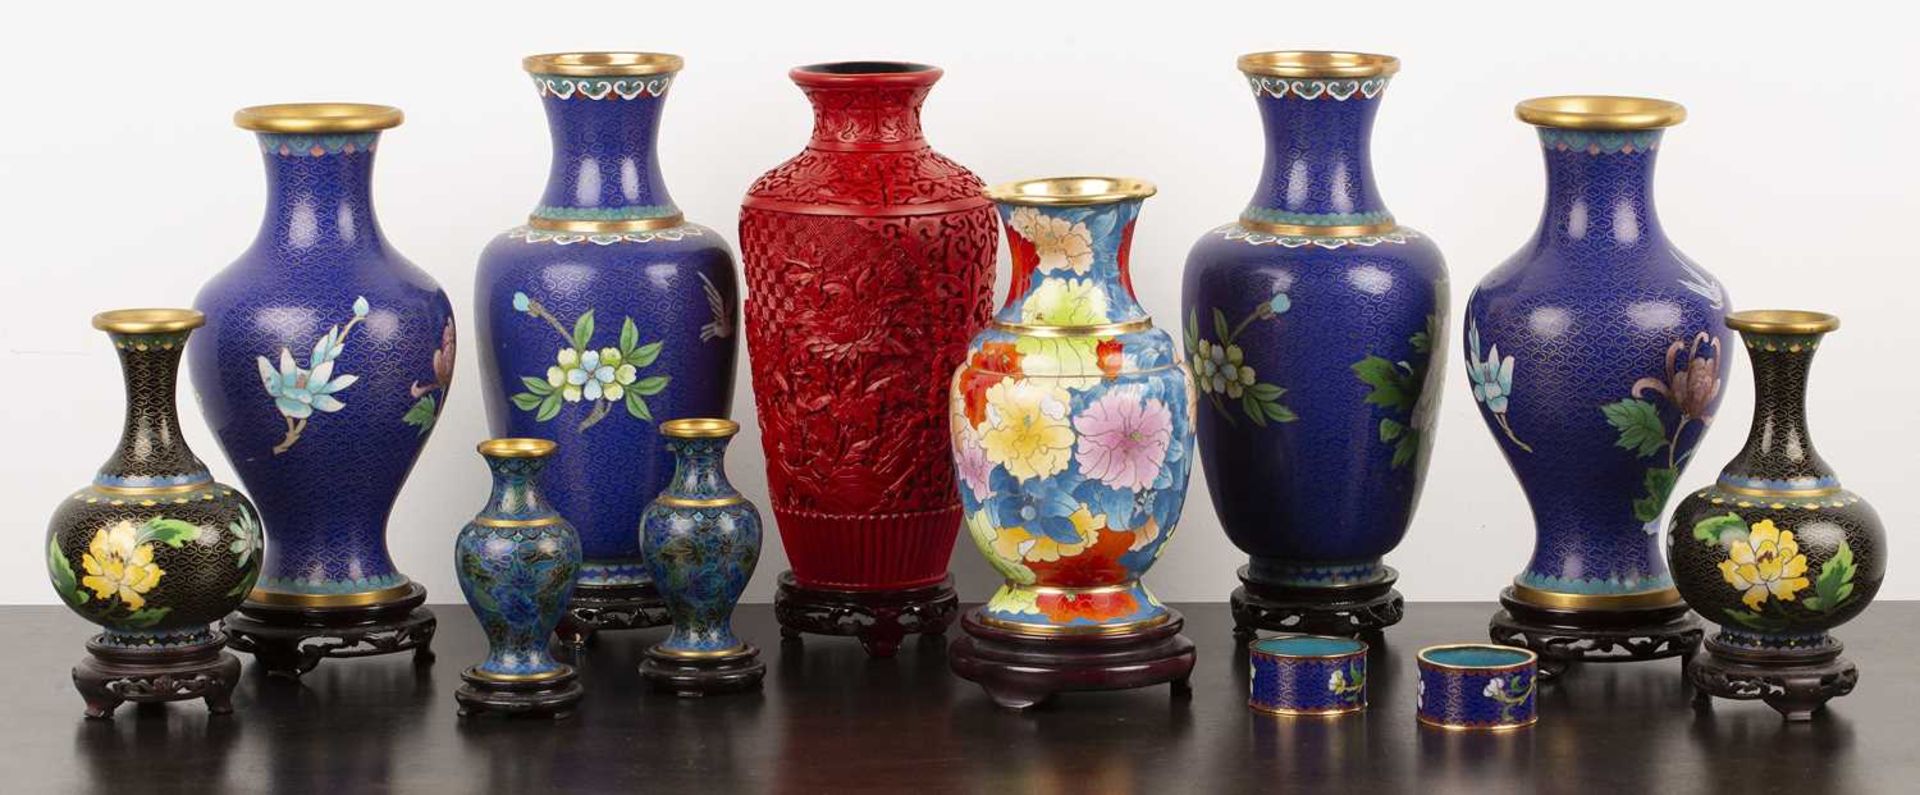 Group of cloisonne vases Chinese, 20th Century, including stands and a cinnabar lacquer vase, - Image 2 of 3